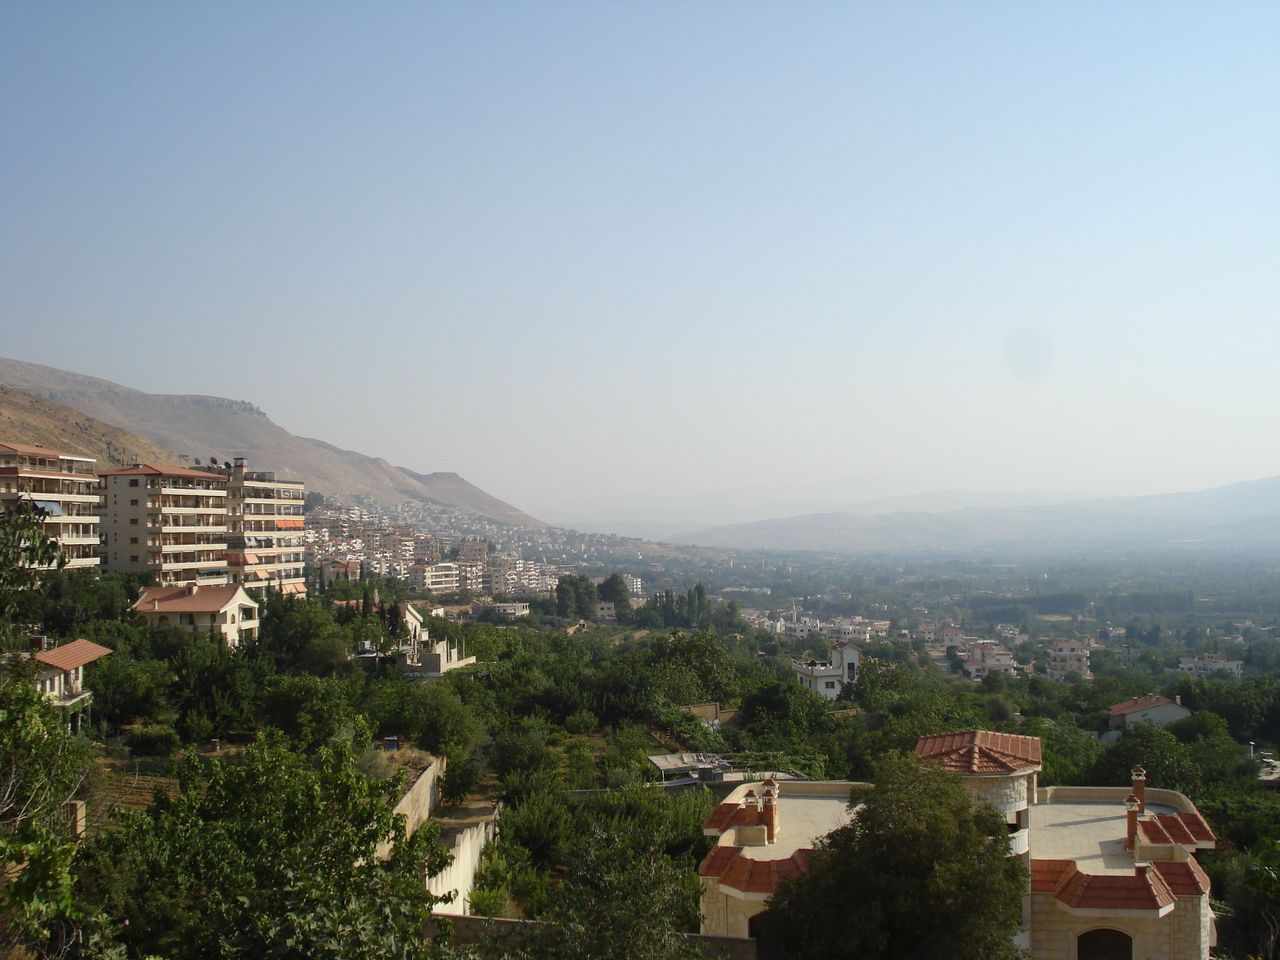 Zabadani was a popular place for Syrians to holiday